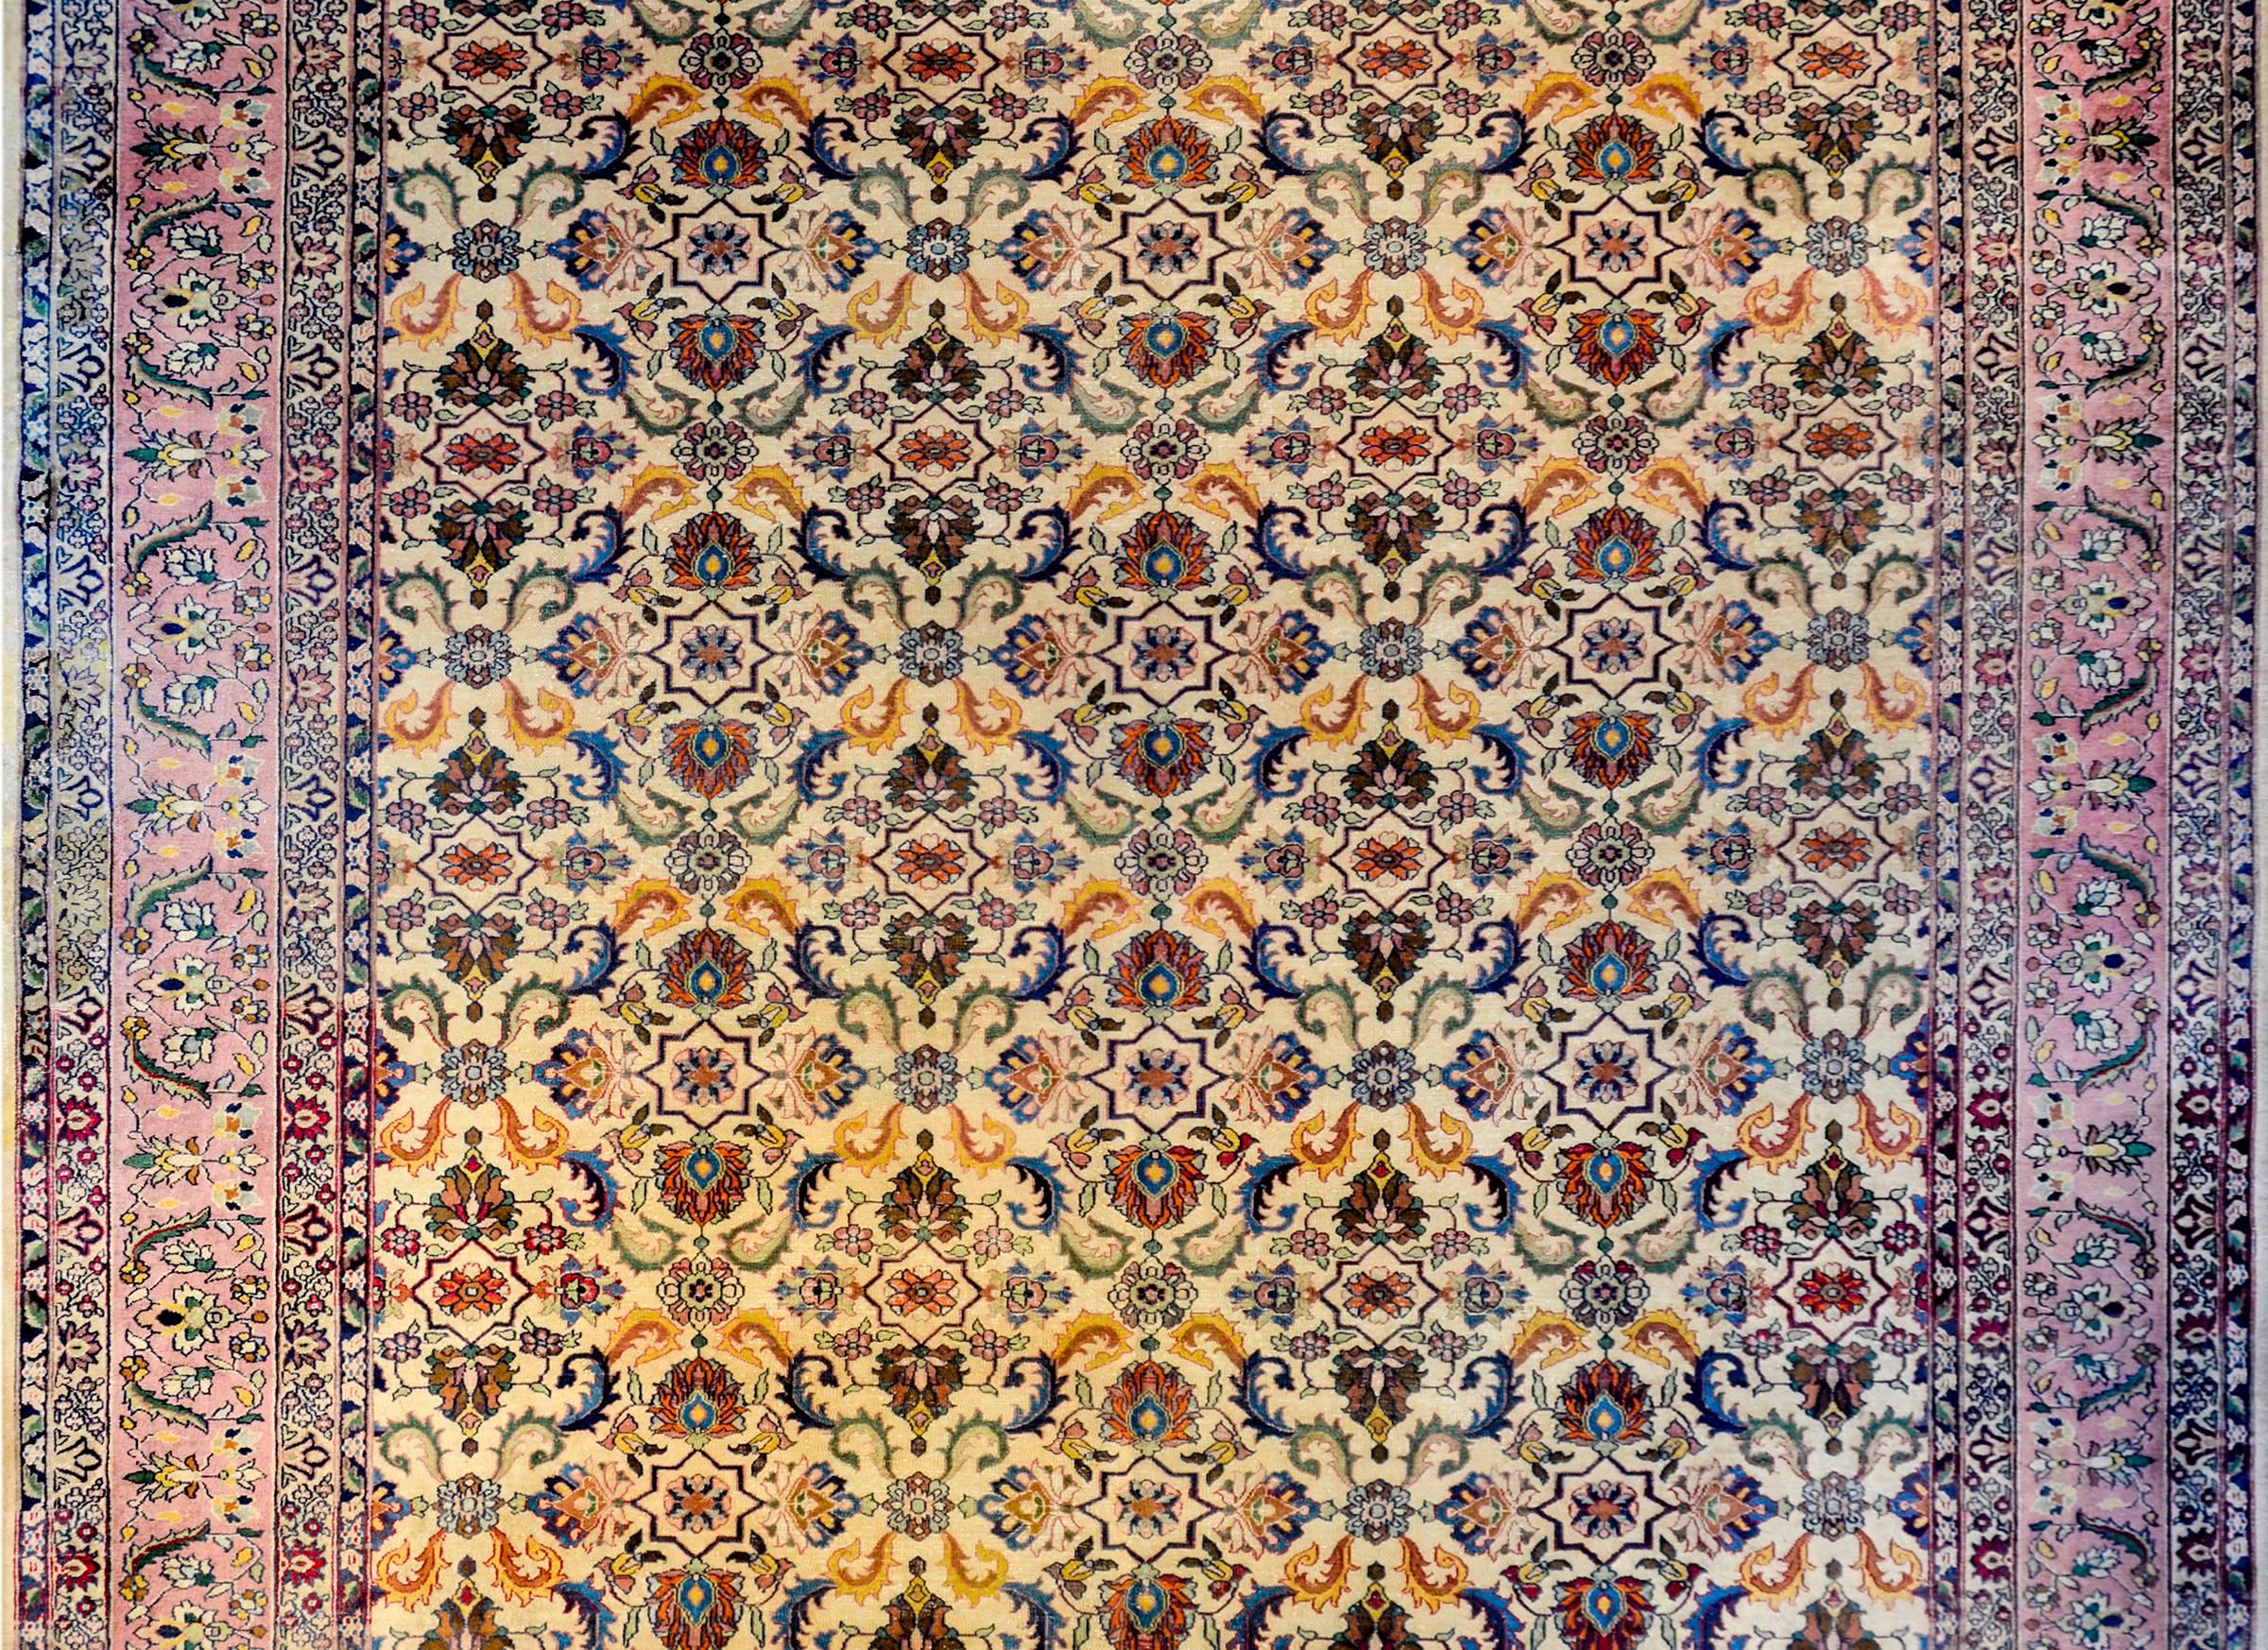 A wonderful early 20th century Indian Agra rug with a large-scale mirrored multicolored floral and vine pattern on a cream colored background. The border is wide with a central floral and vine patterned central strip flanked by matching petite flora